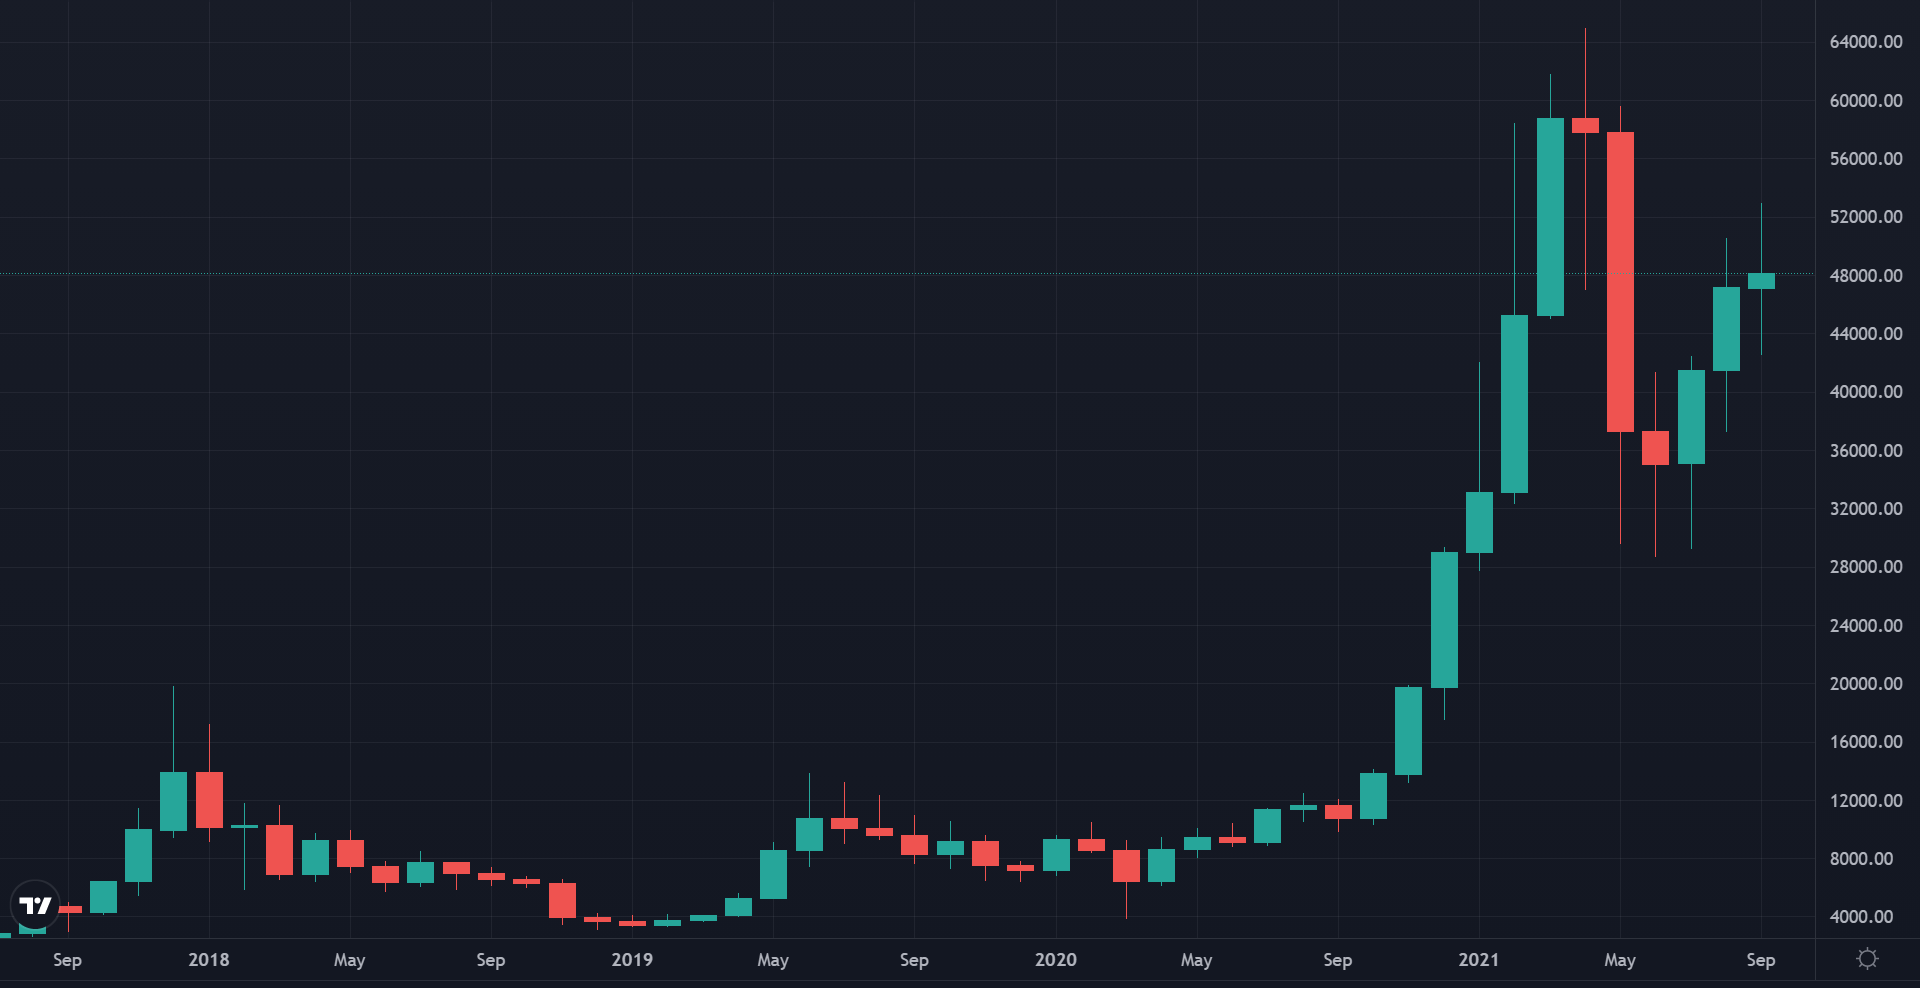 Price of Bitcoin from 2018 to 2021.